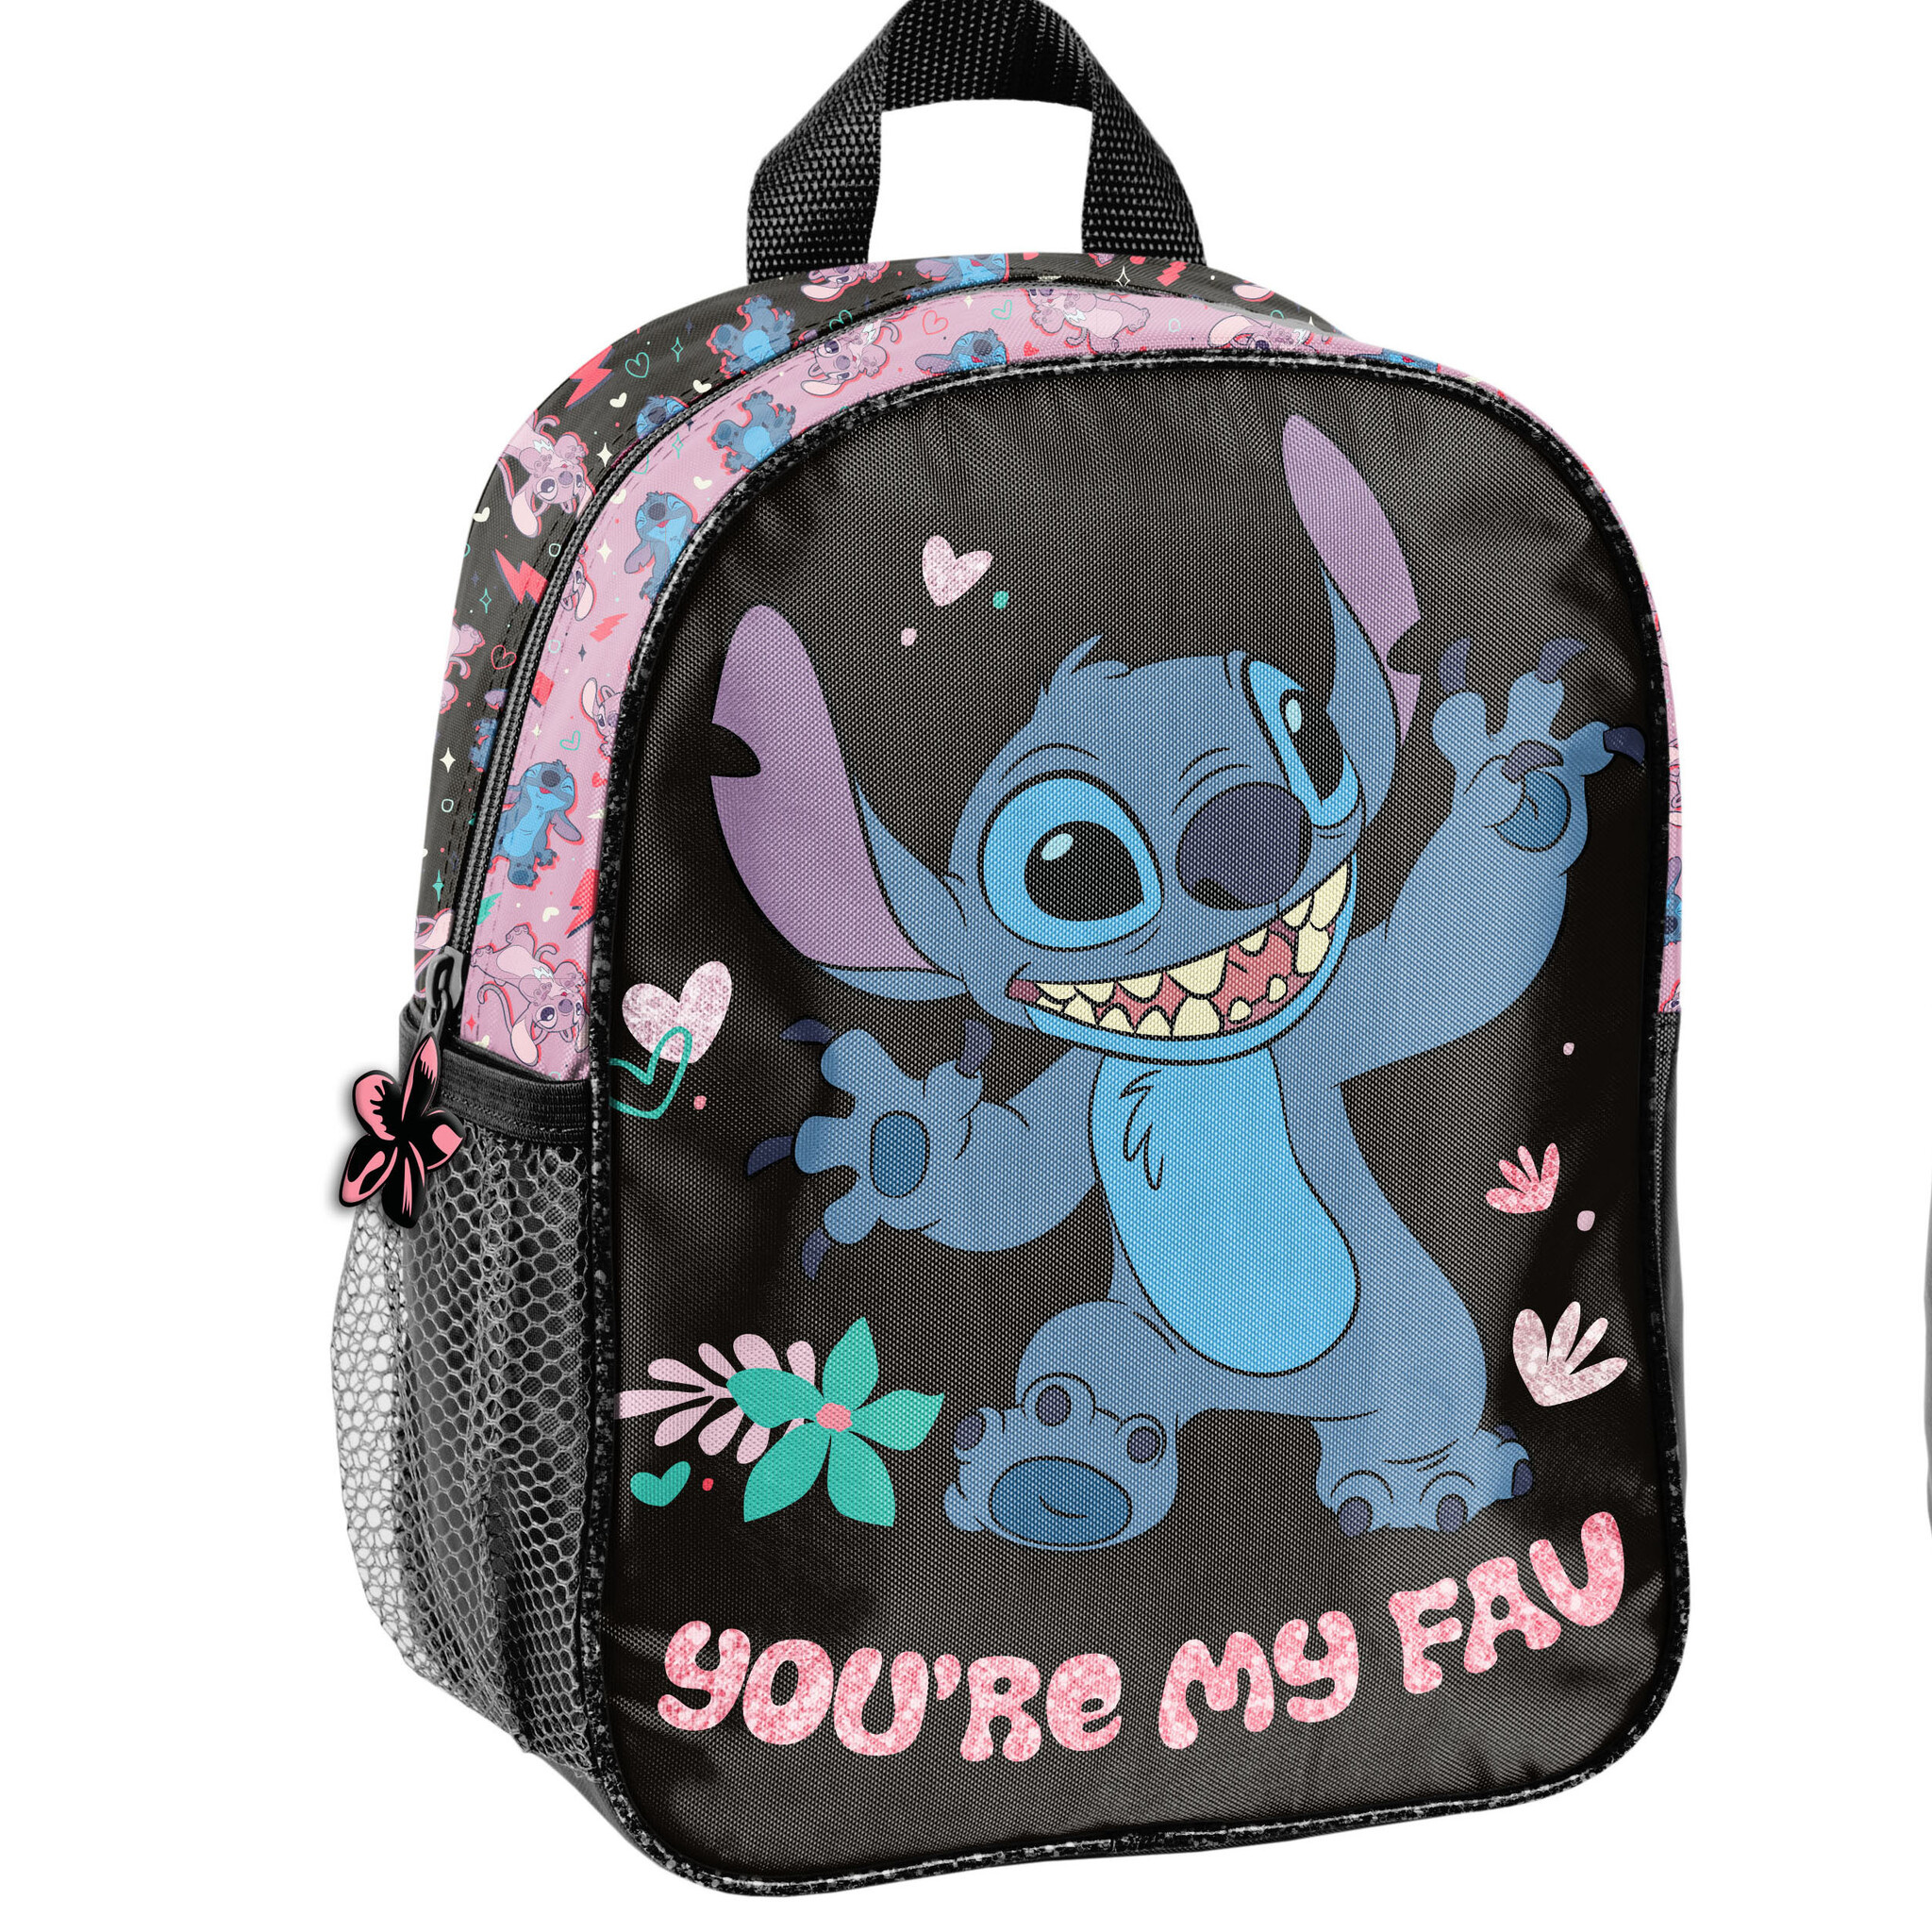 Disney Lilo & Stitch Toddler backpack You're my Fav - 28 x 22 x 10 cm - Polyester